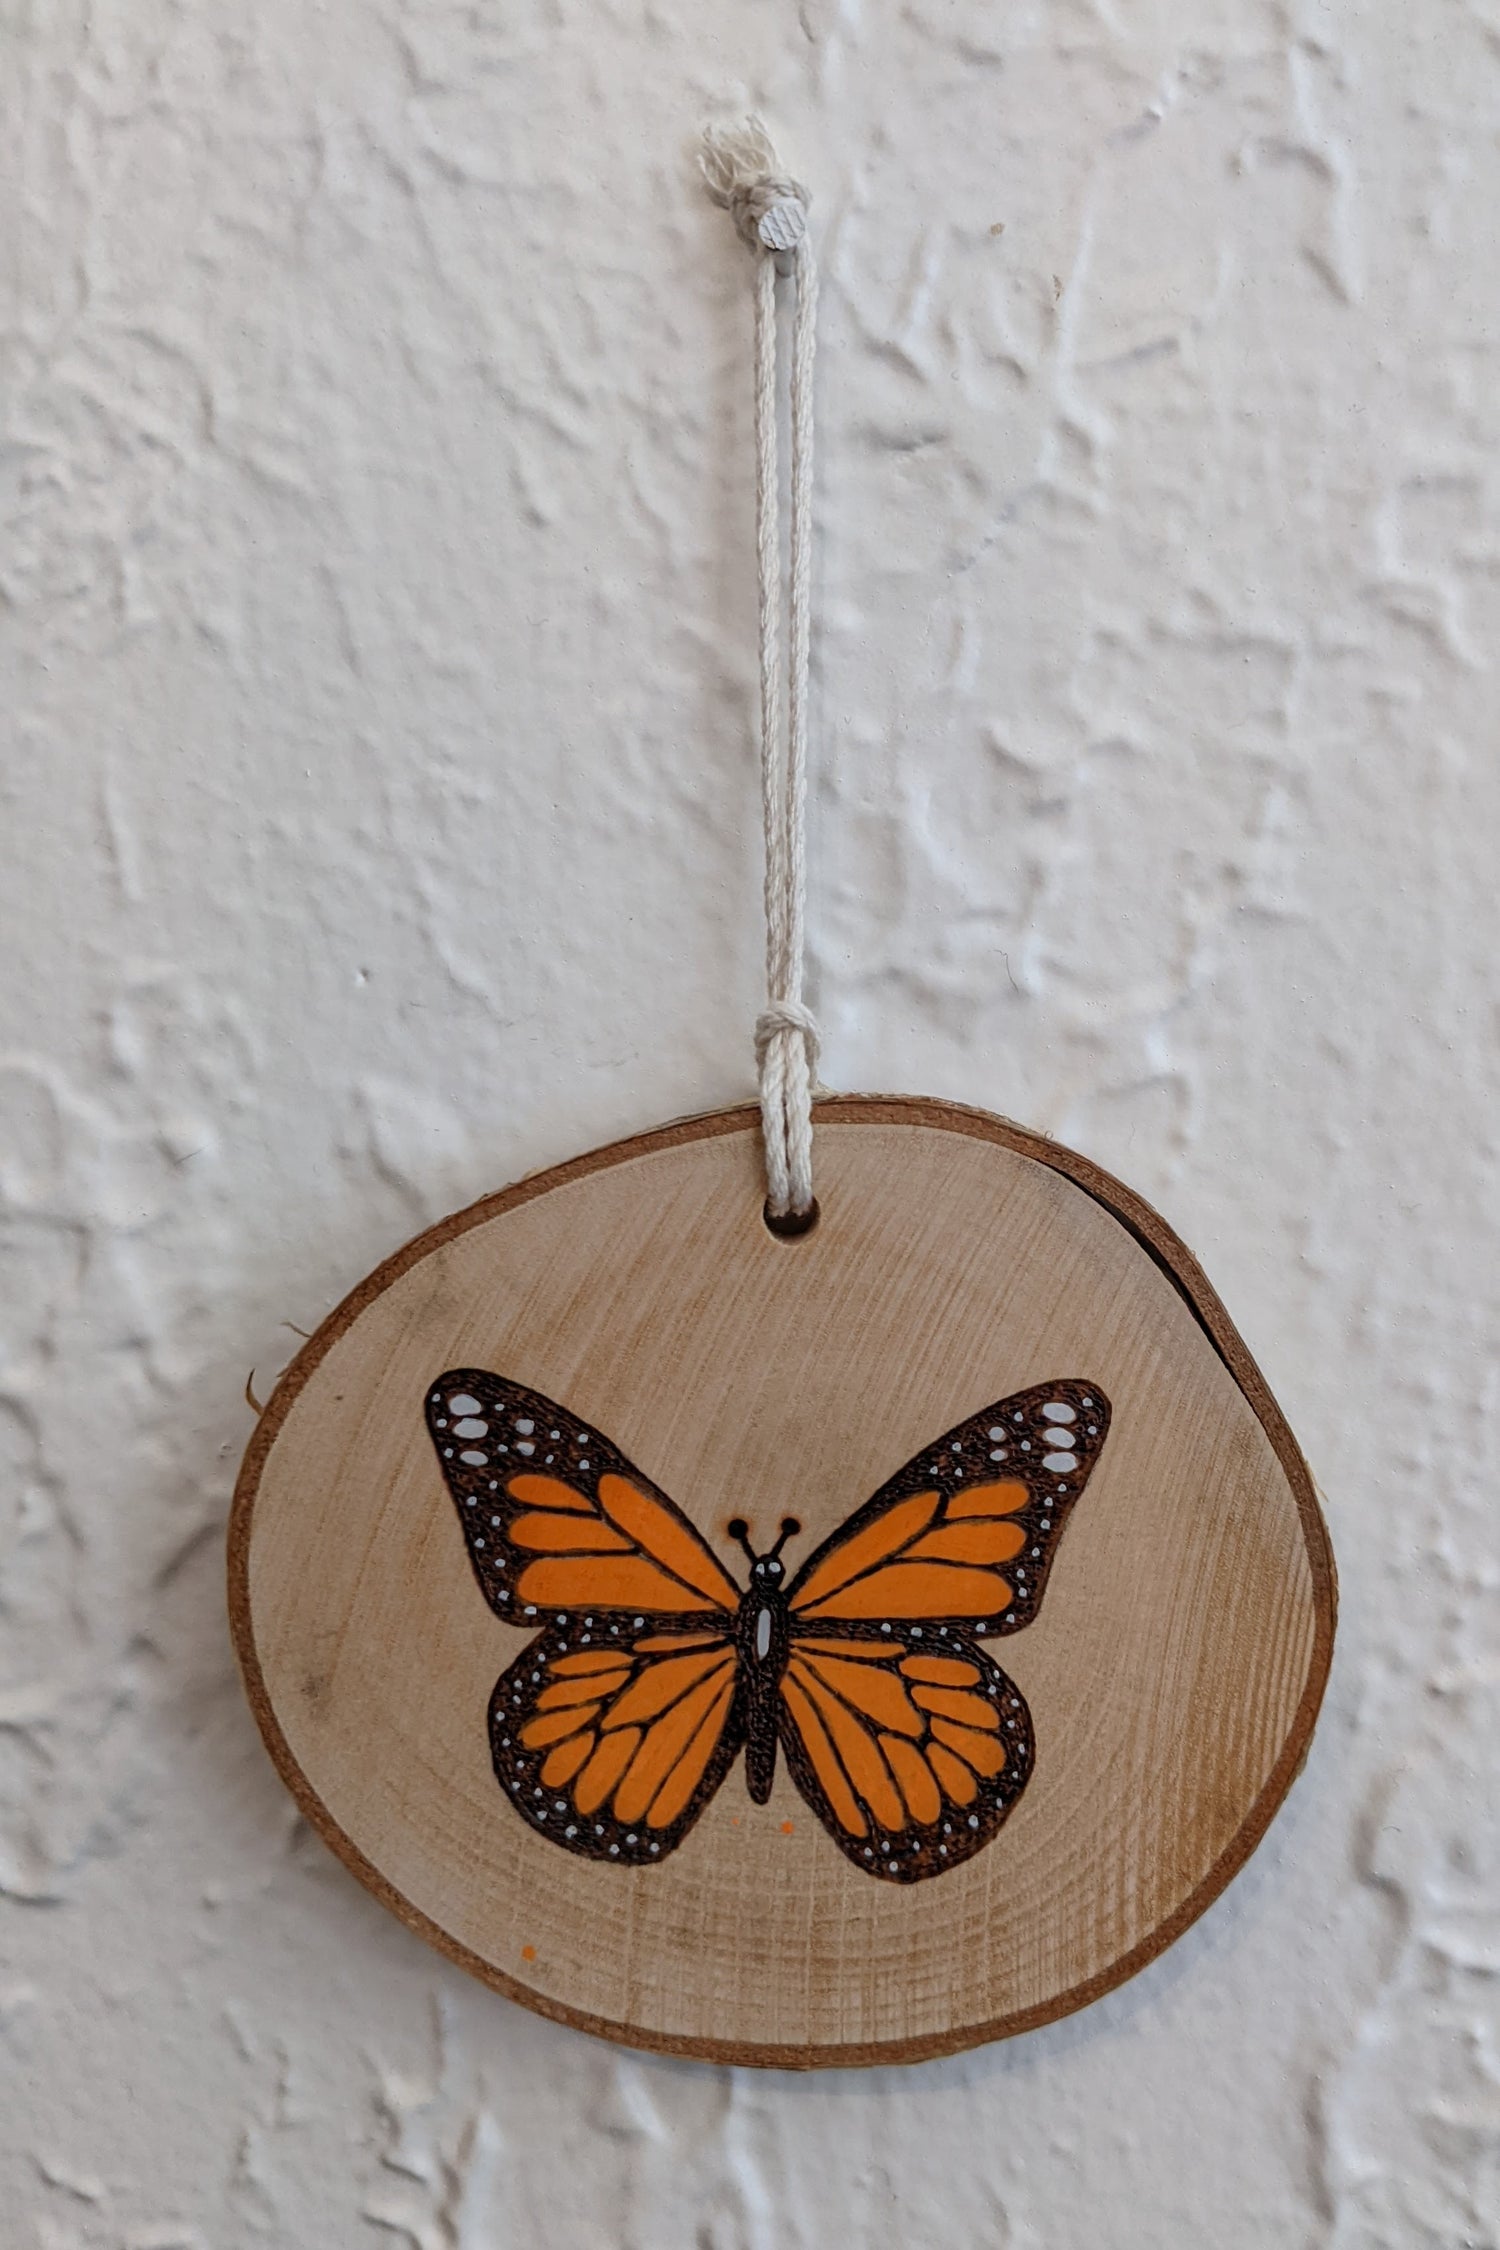 Wood burned Art by Wood Wanderlust Ornament with Monarch